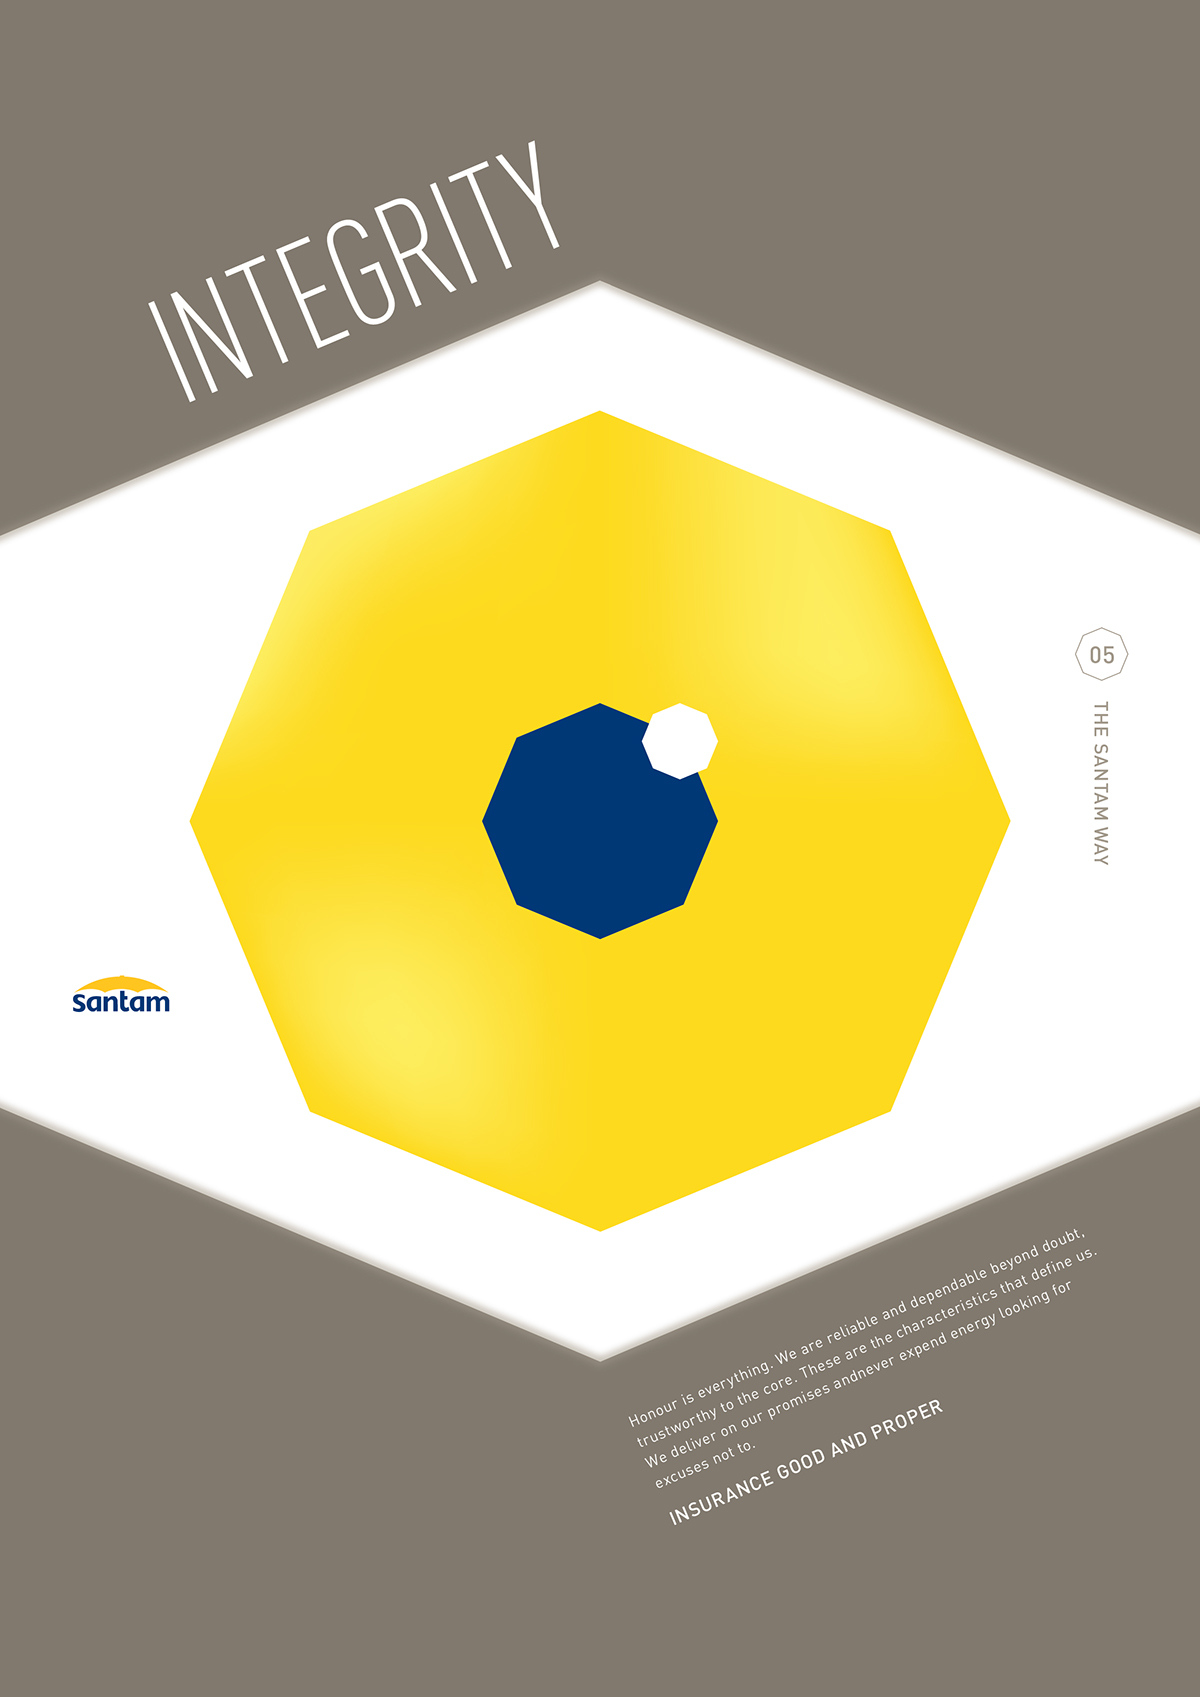 vector value Values design poster yellow Umbrella excellence integrity innovation passion humanity Santam shapes